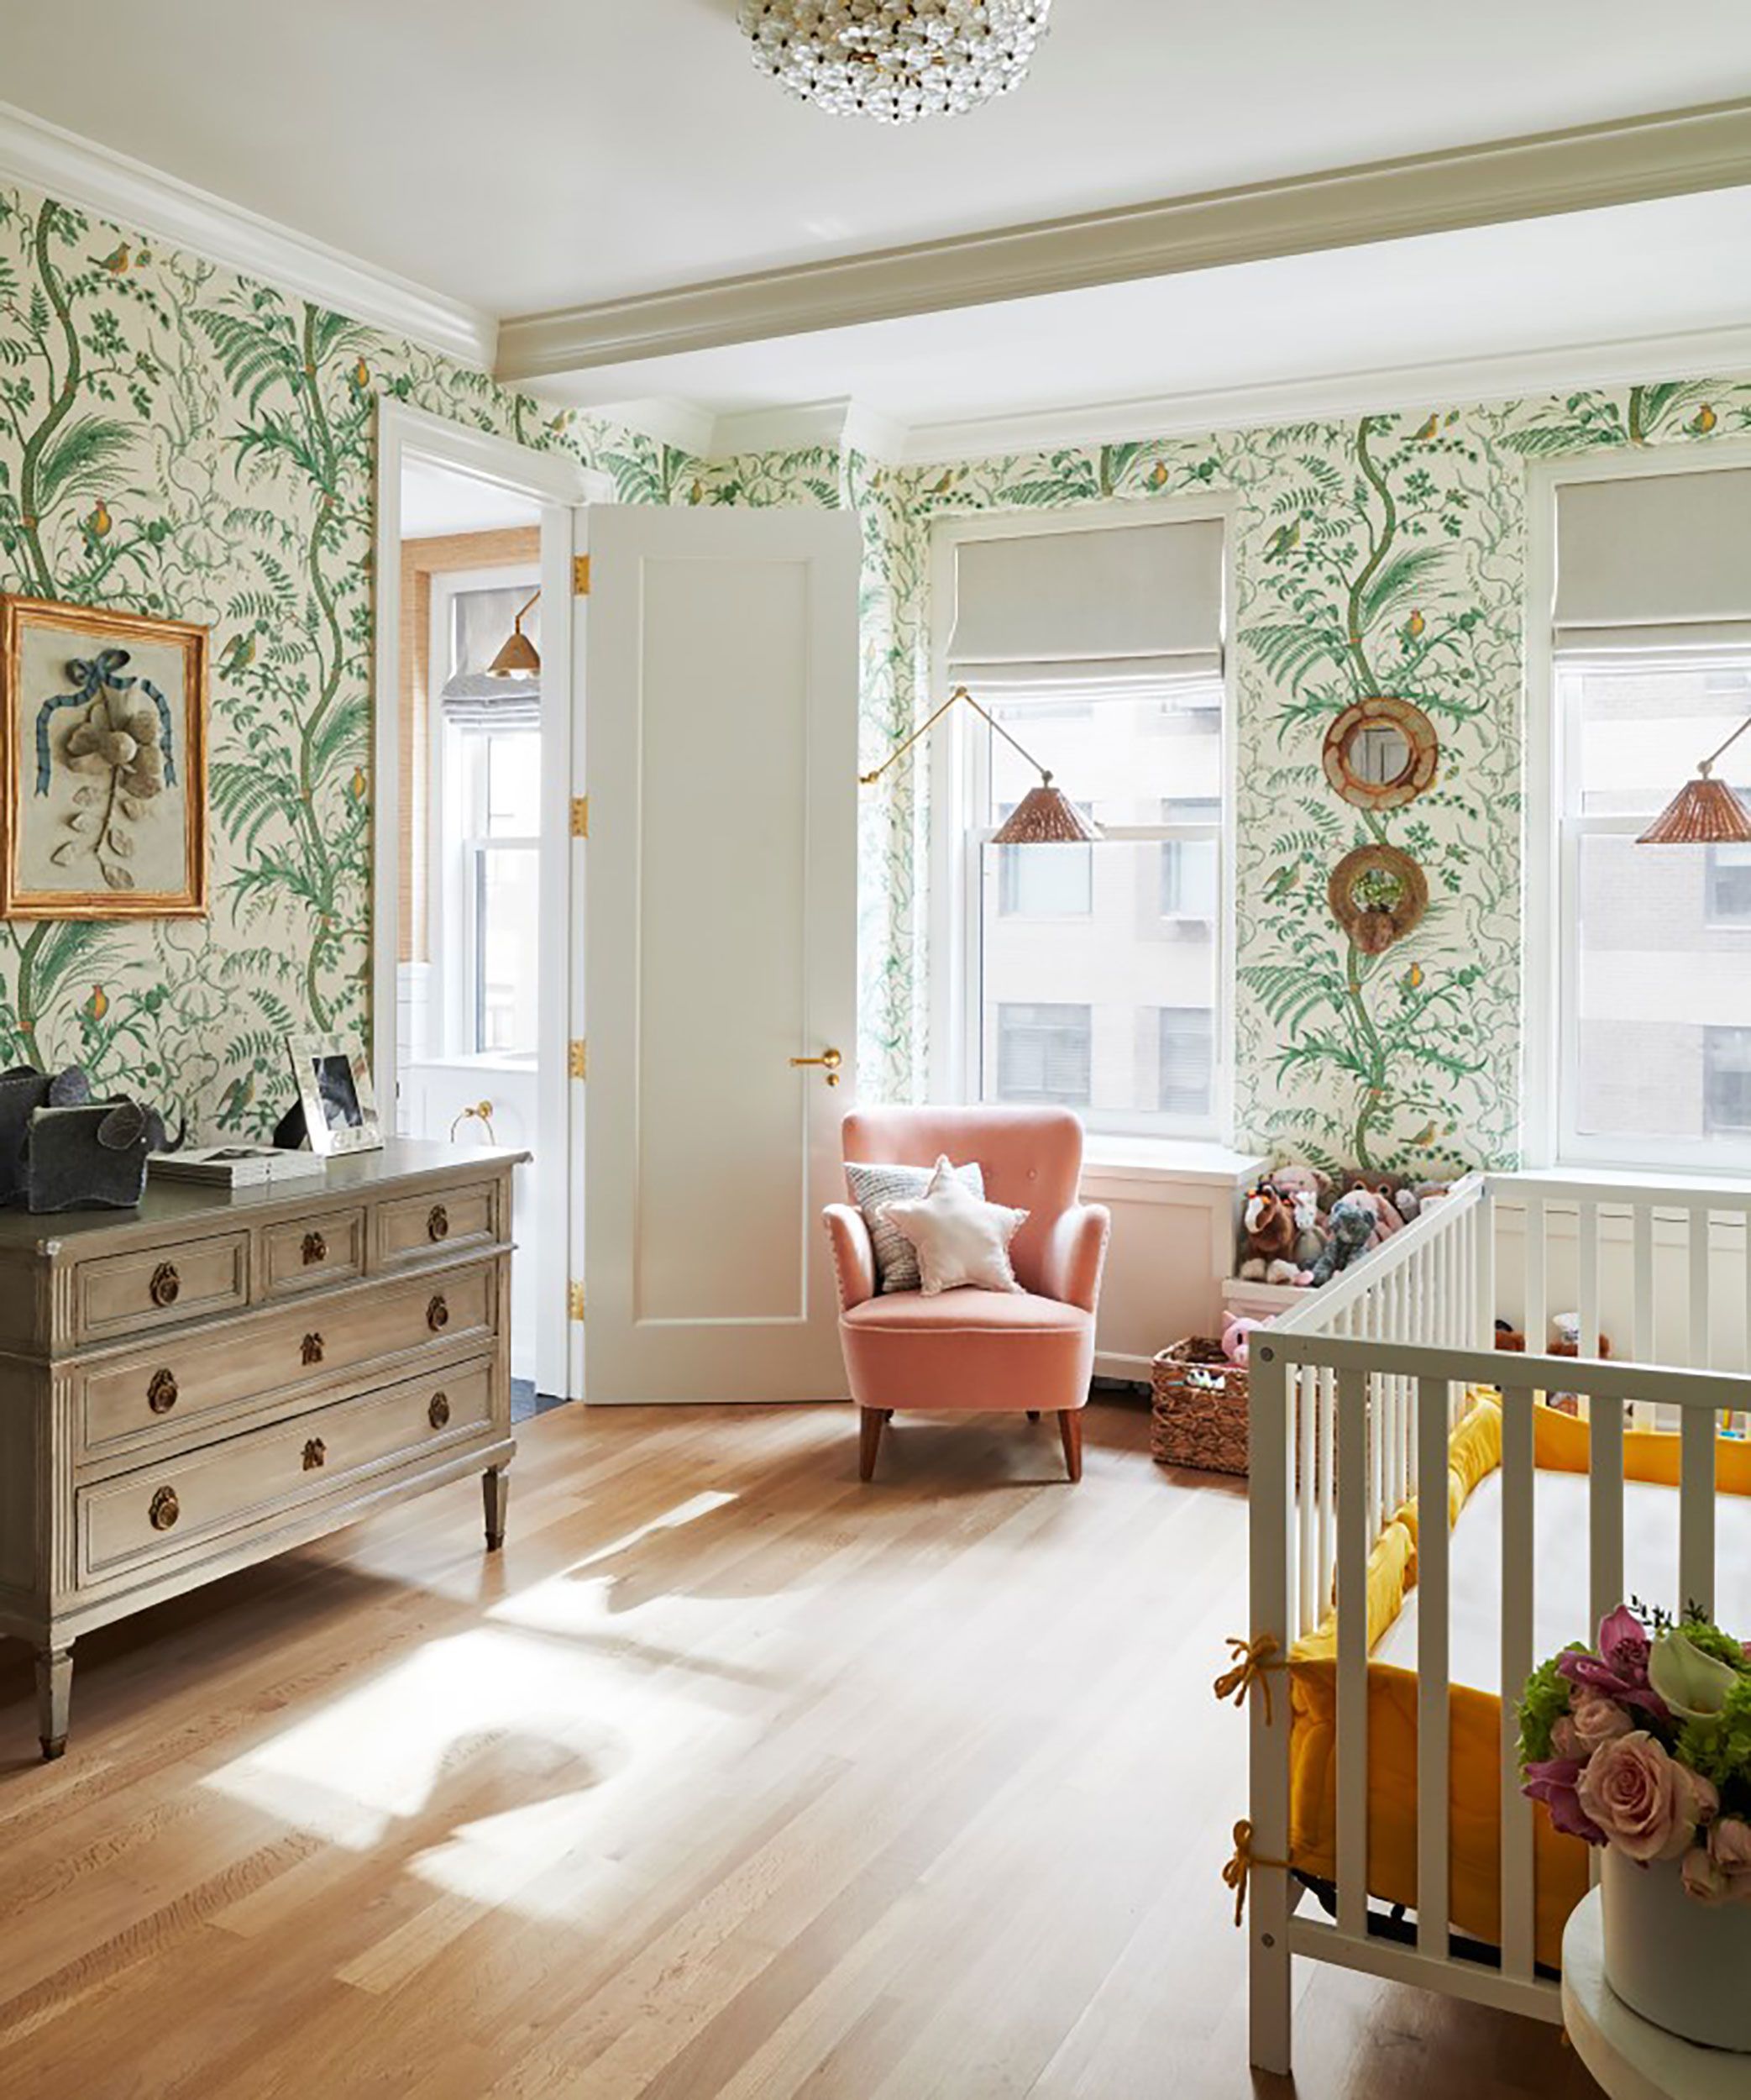 I LOVE everything about this dining room creativetonic brunschwigfils  Bird and Thistle wallp  Dining room wallpaper Green dining room  Chinoiserie dining room